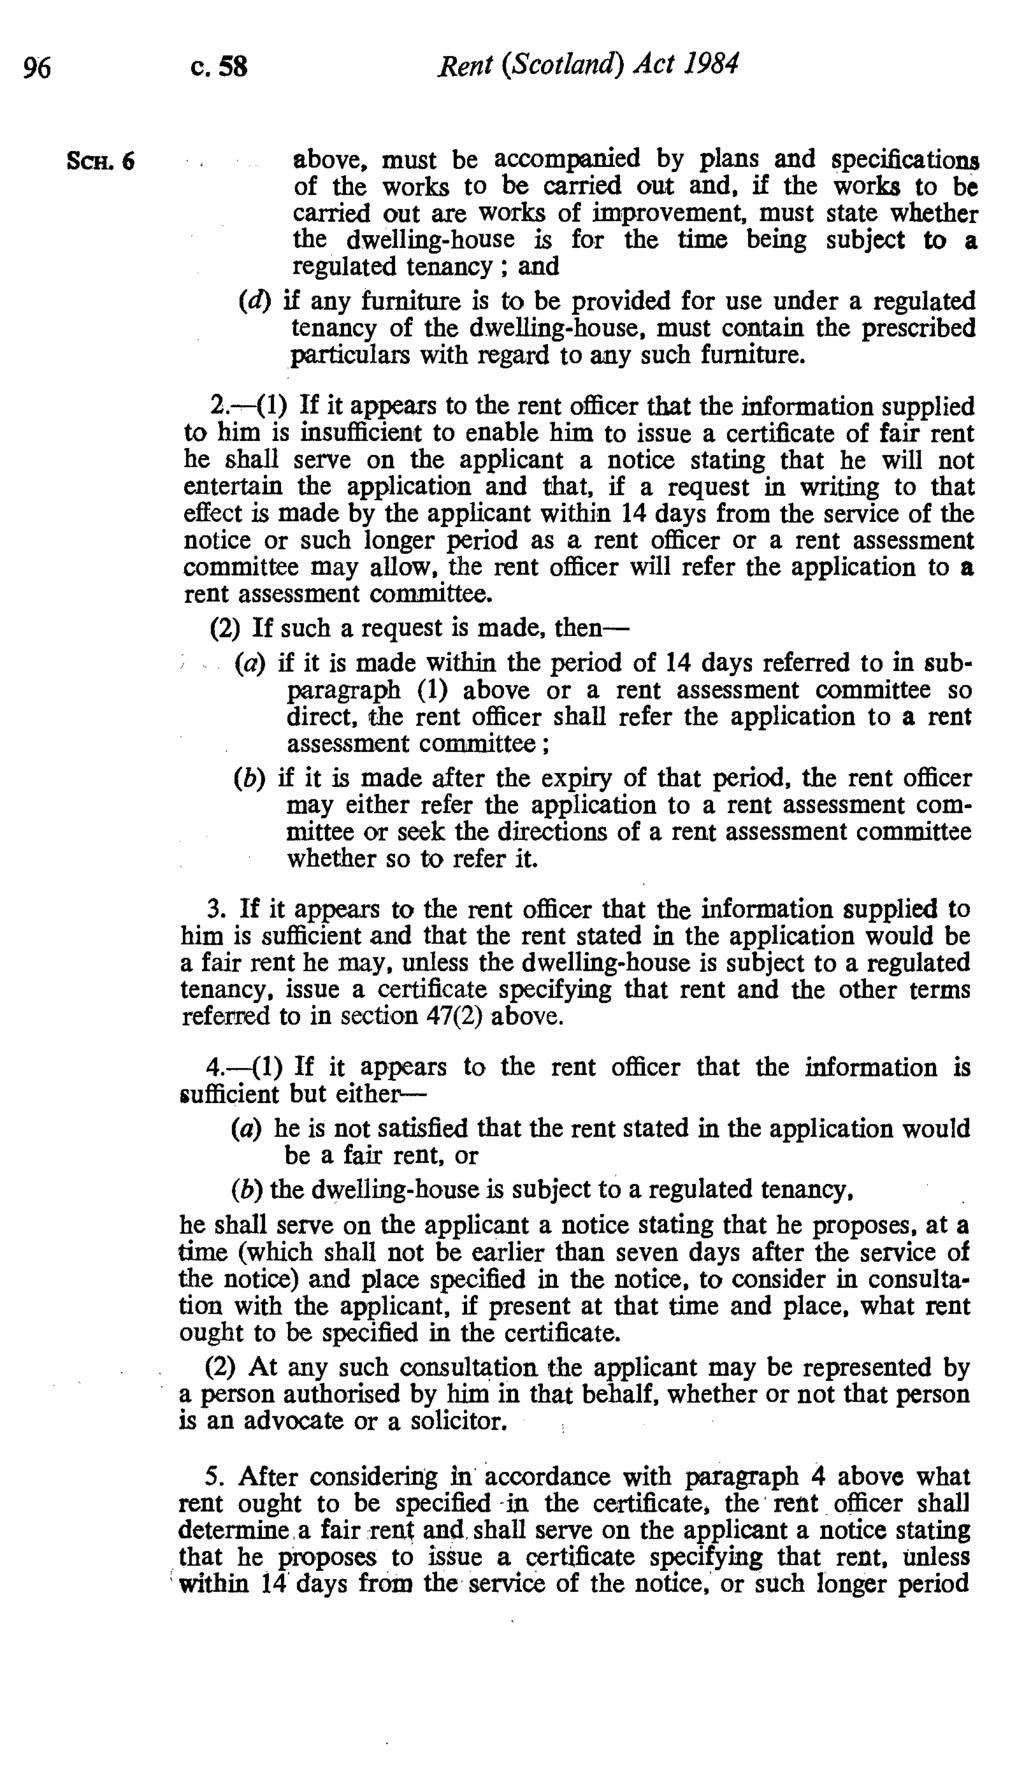 96 c. 58 Rent (Scotland) Act 1984 ScH, 6 above, must be accompanied by plans and specifications of the works to be carried out and, if the works to be carried out are works of improvement, must state